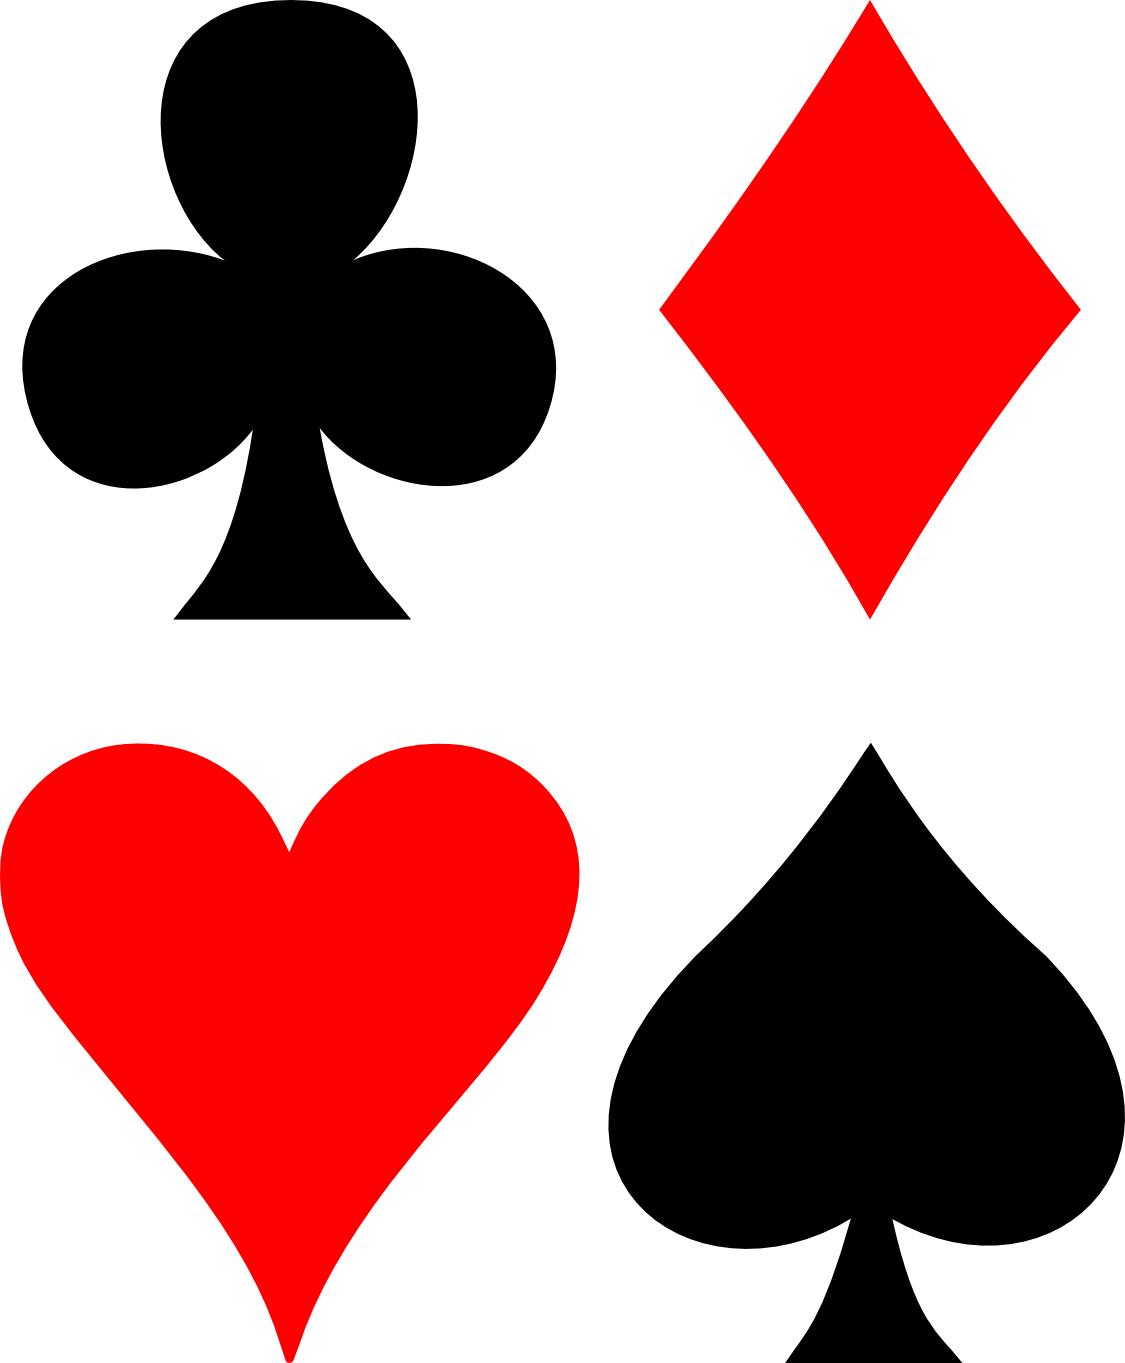 Playing Card Suit Symbols PNG | PNG Mart